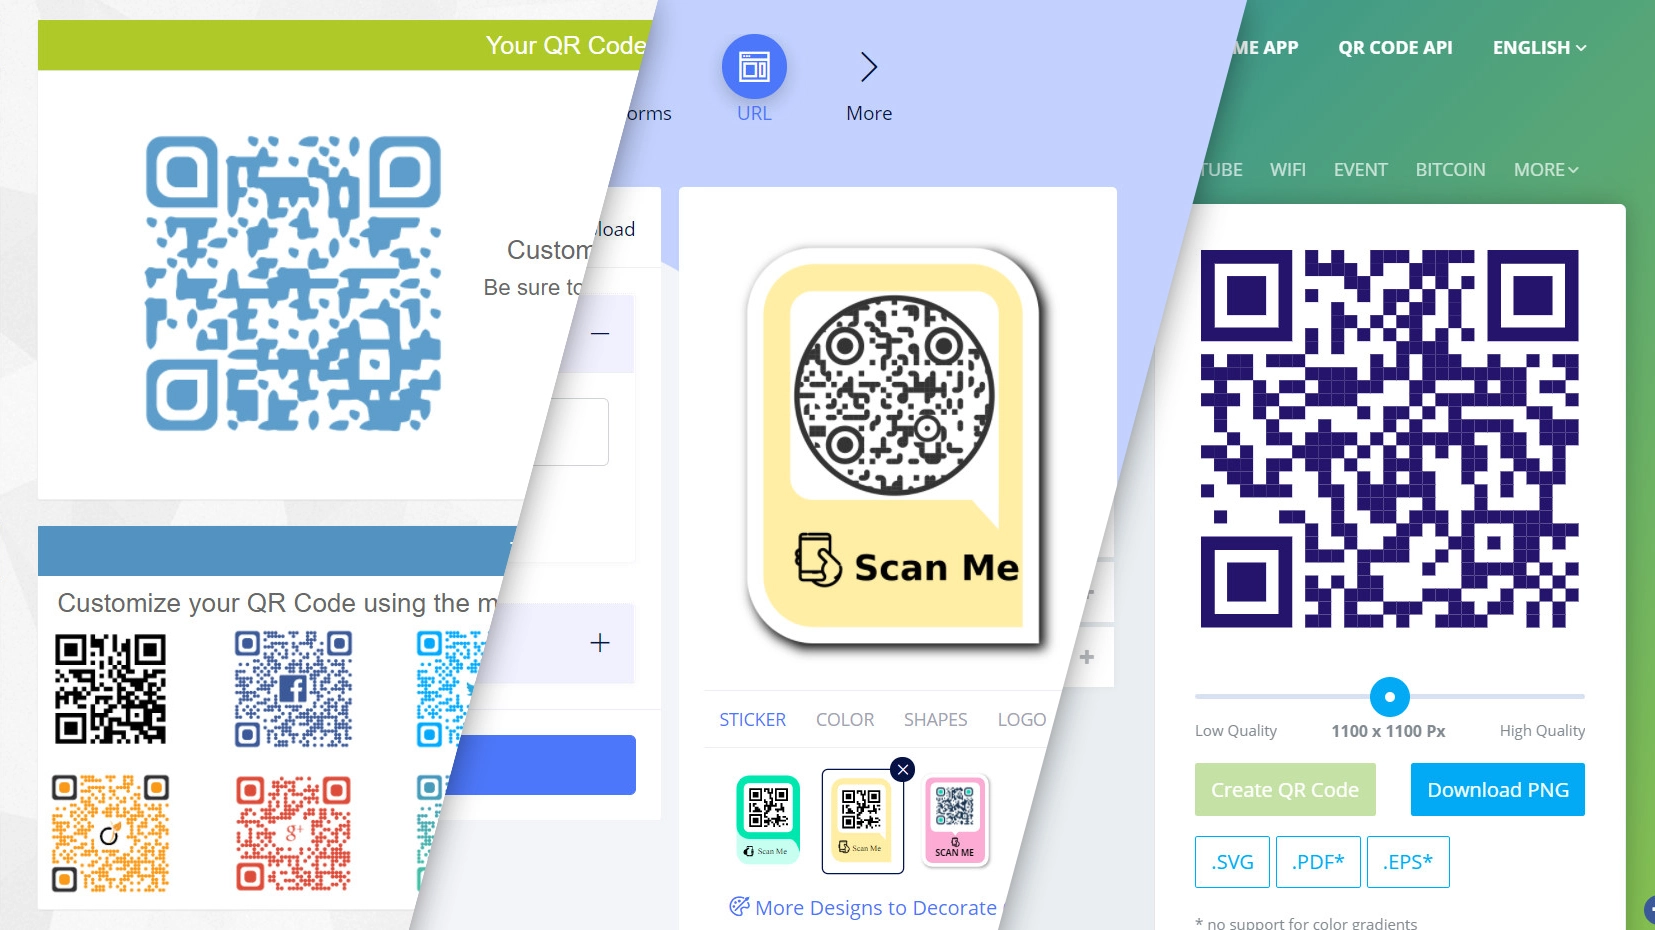 URL to QR codes in different styles and colored design